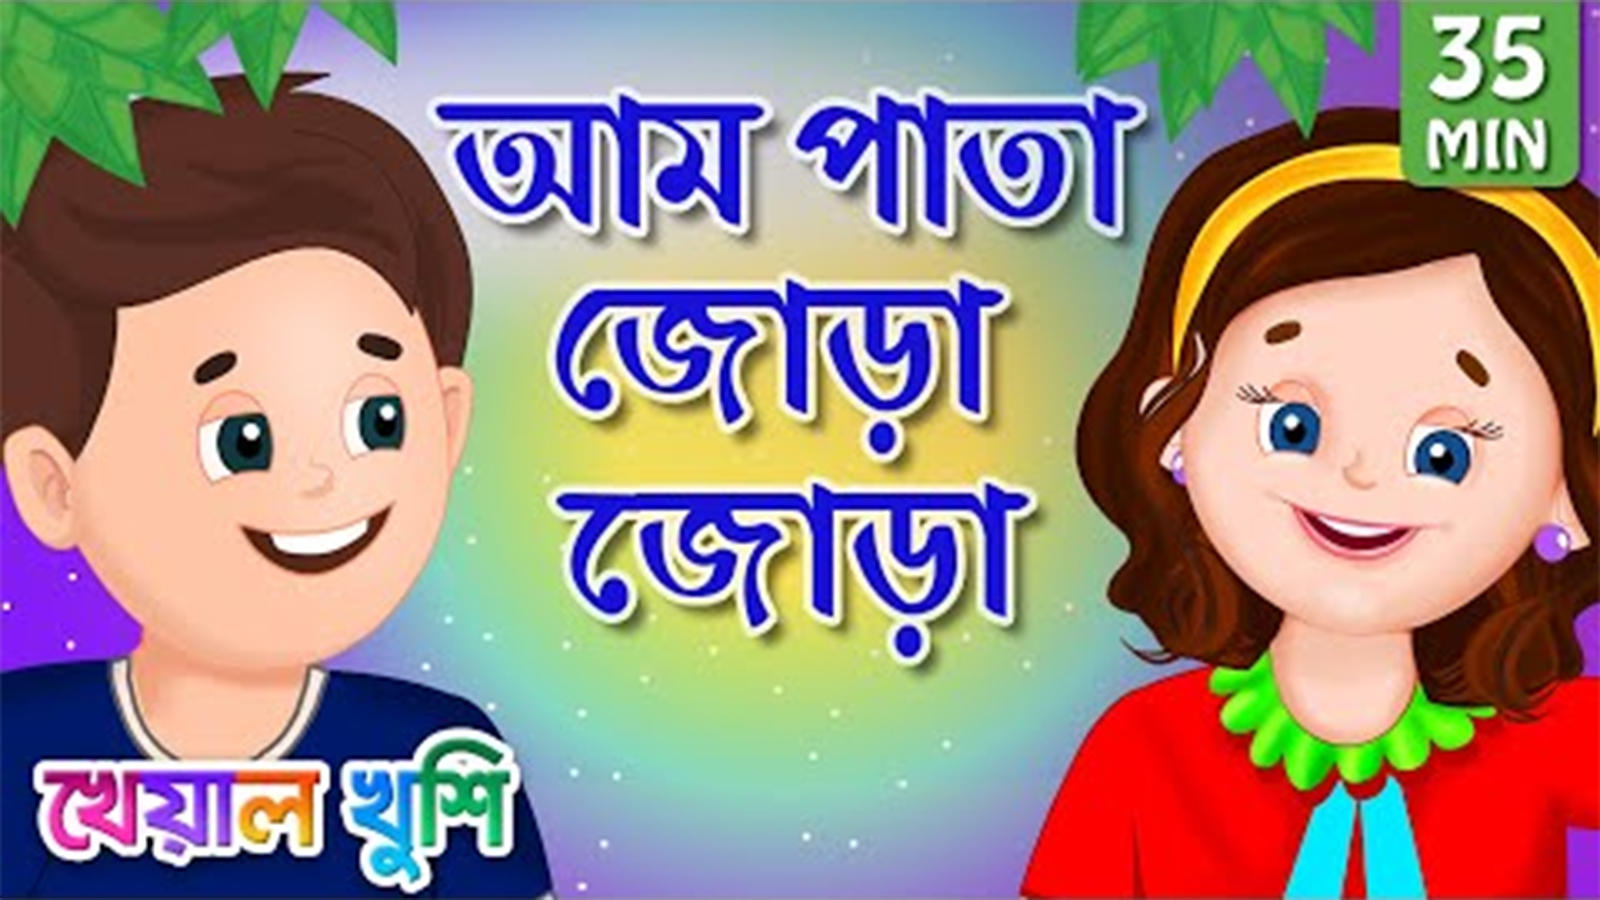 Popular Kids Songs and Bengali Nursery Rhyme 'আম পাতা জোড়া' for Kids -  Check out Children's Nursery Stories, Baby Songs, Fairy Tales In Bengali |  Entertainment - Times of India Videos